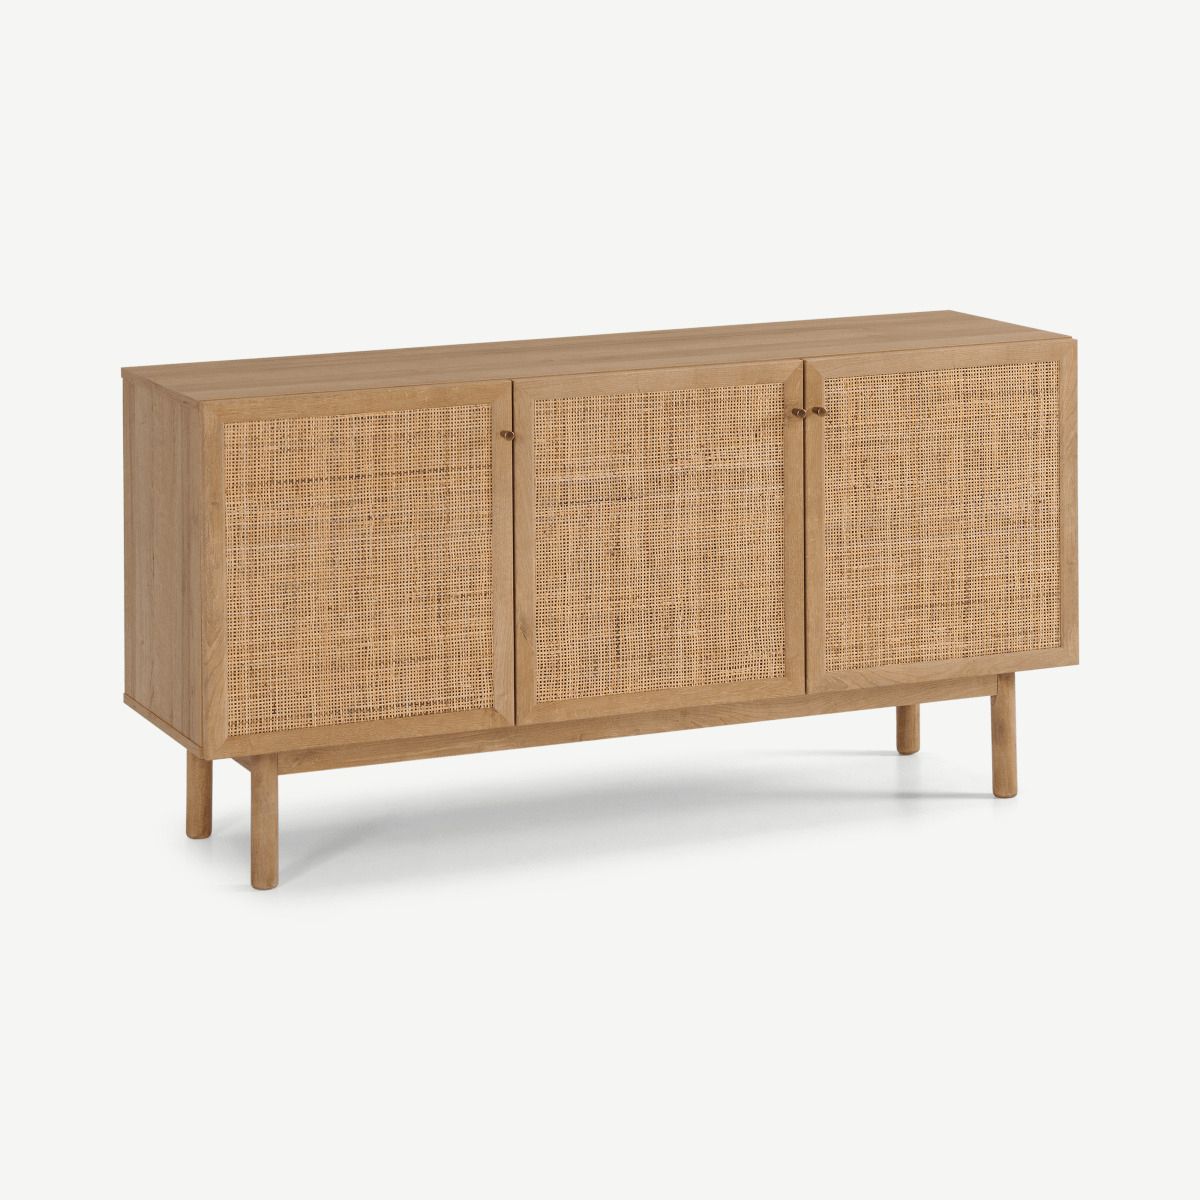 Assembled Rattan Sideboards Intended For Most Current Pavia Sideboard, Natural Rattan & Oak Effectmade (View 6 of 10)